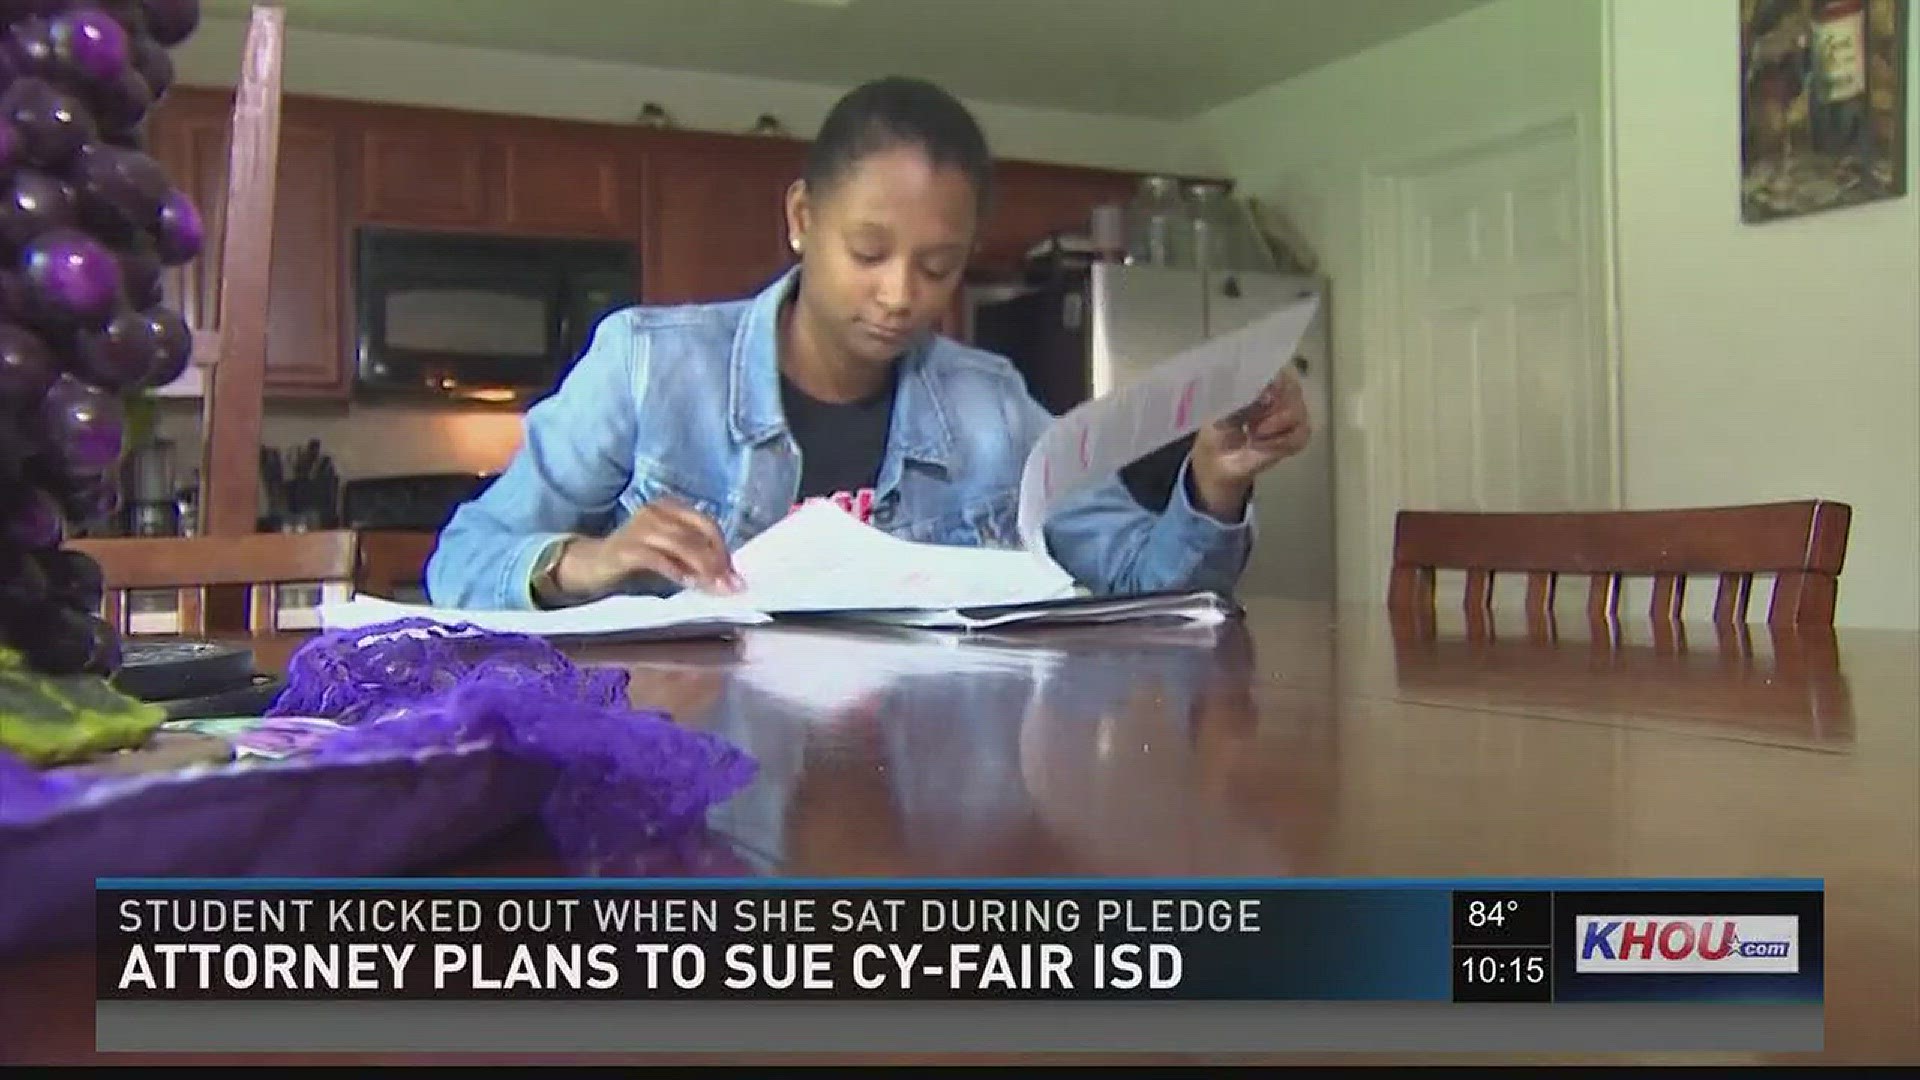 An attorney is planning to sue the Cy Fair school district after a local high school senior was suspended for sitting during the Pledge of Allegiance.